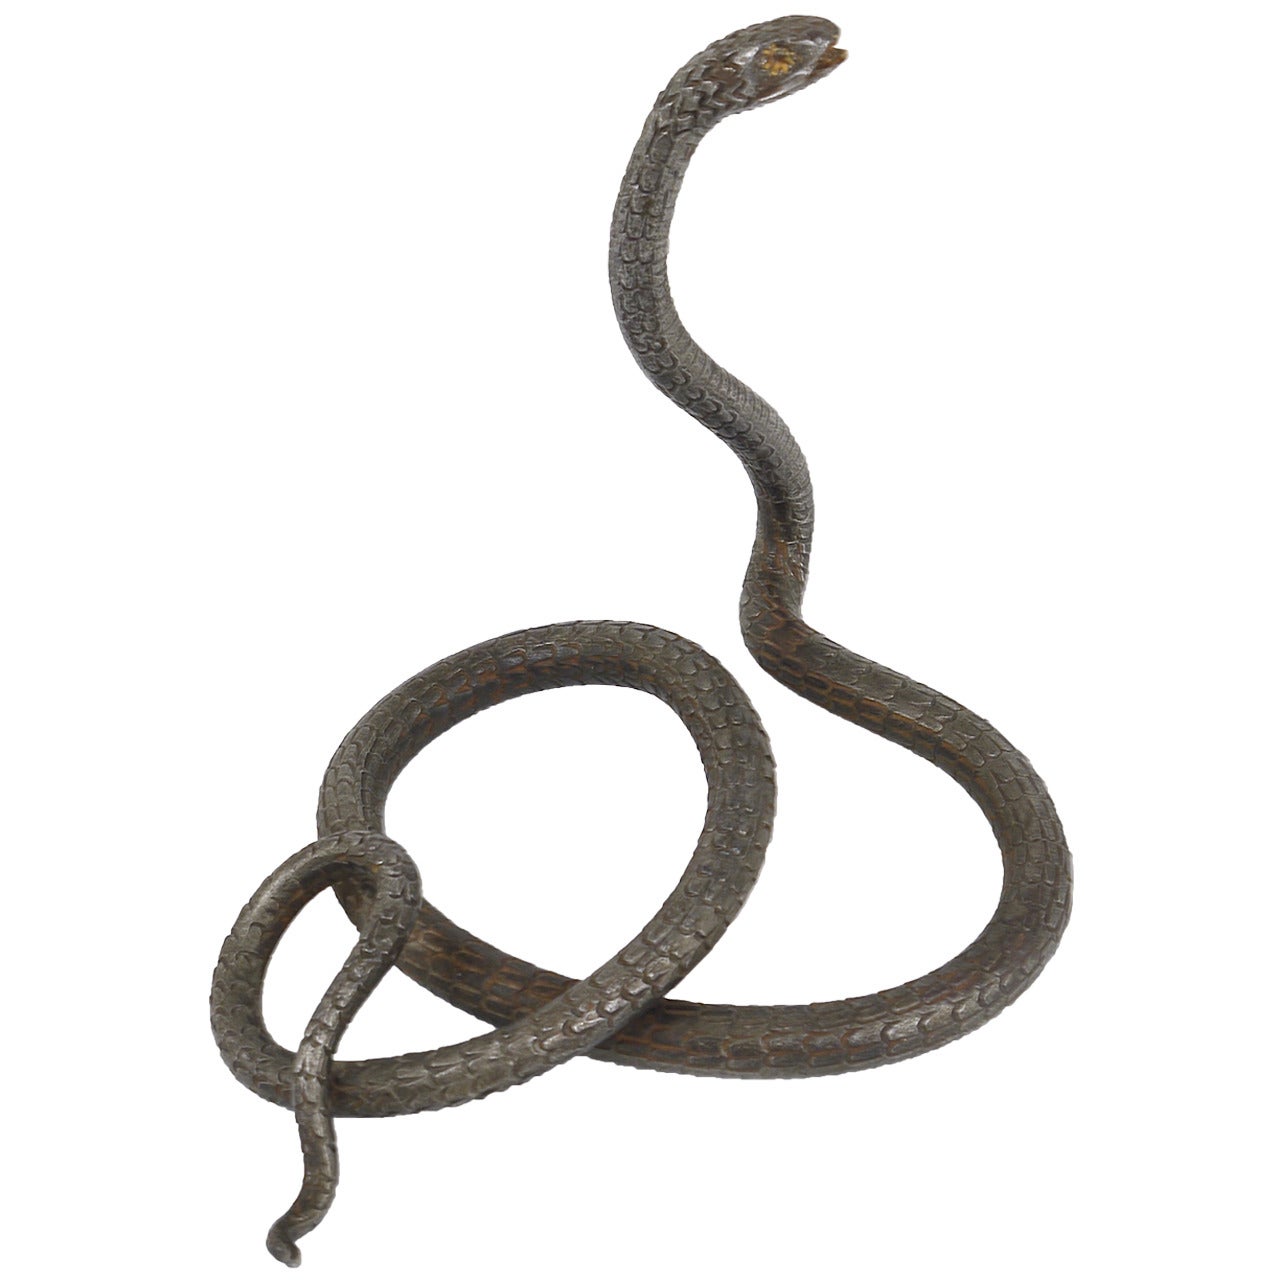 A Hand-Forged Iron Model Of A Snake, Snake Sculpture, Vienna, 1920s